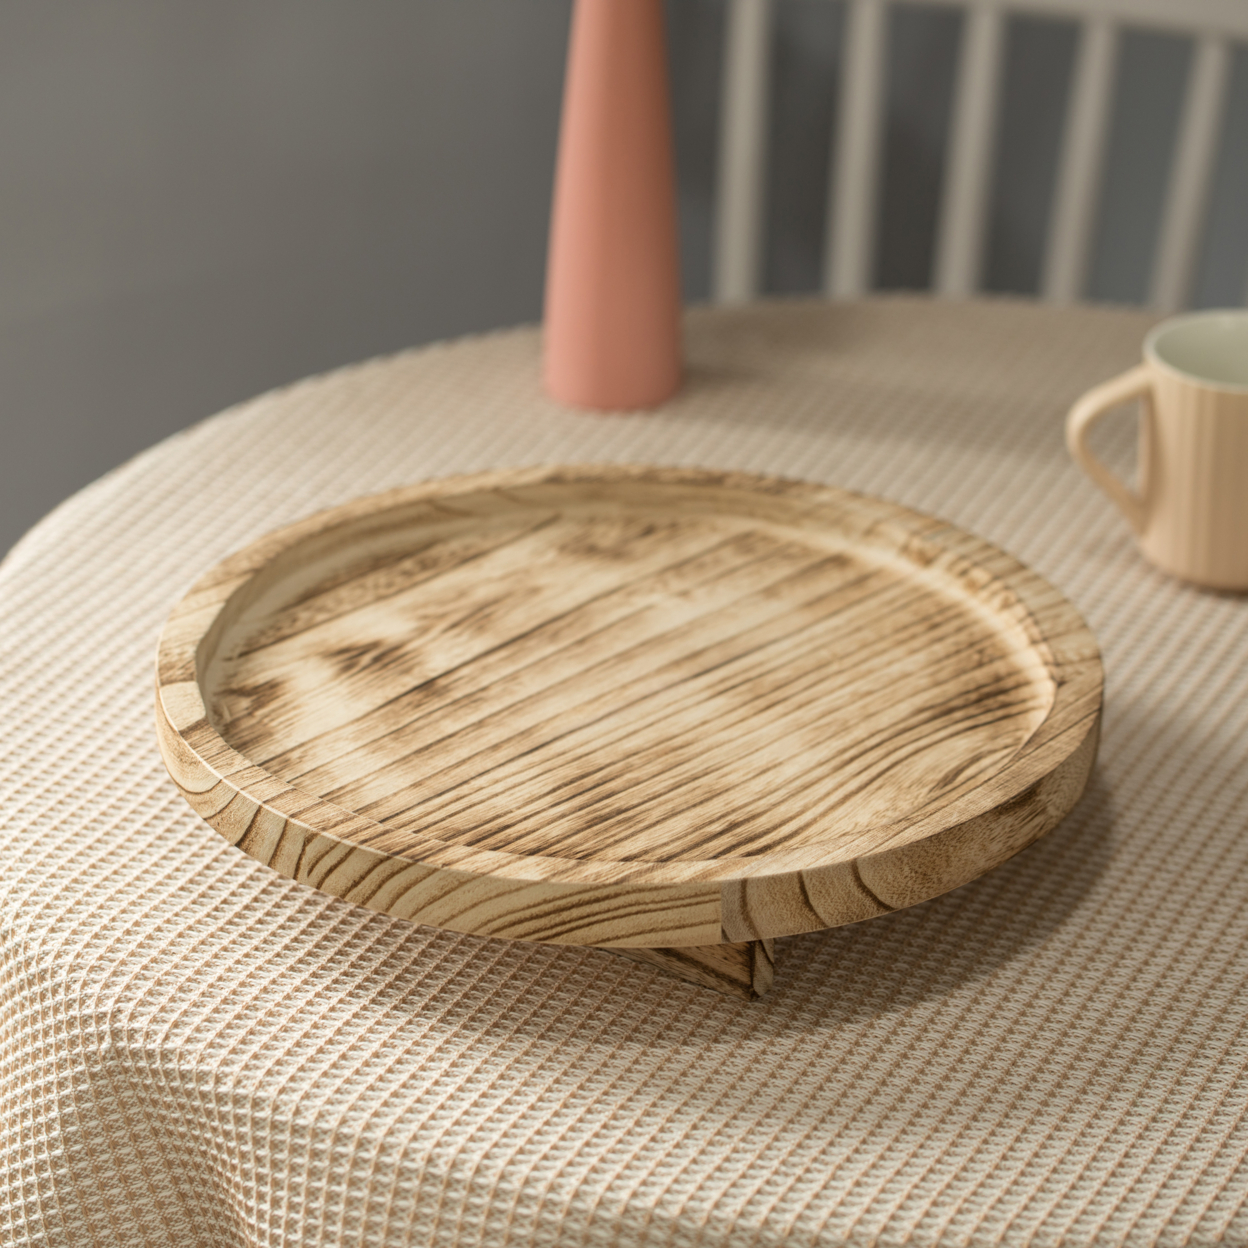 Natural Wooden Round Dish Ornament Slice Tray Table Charger With Height